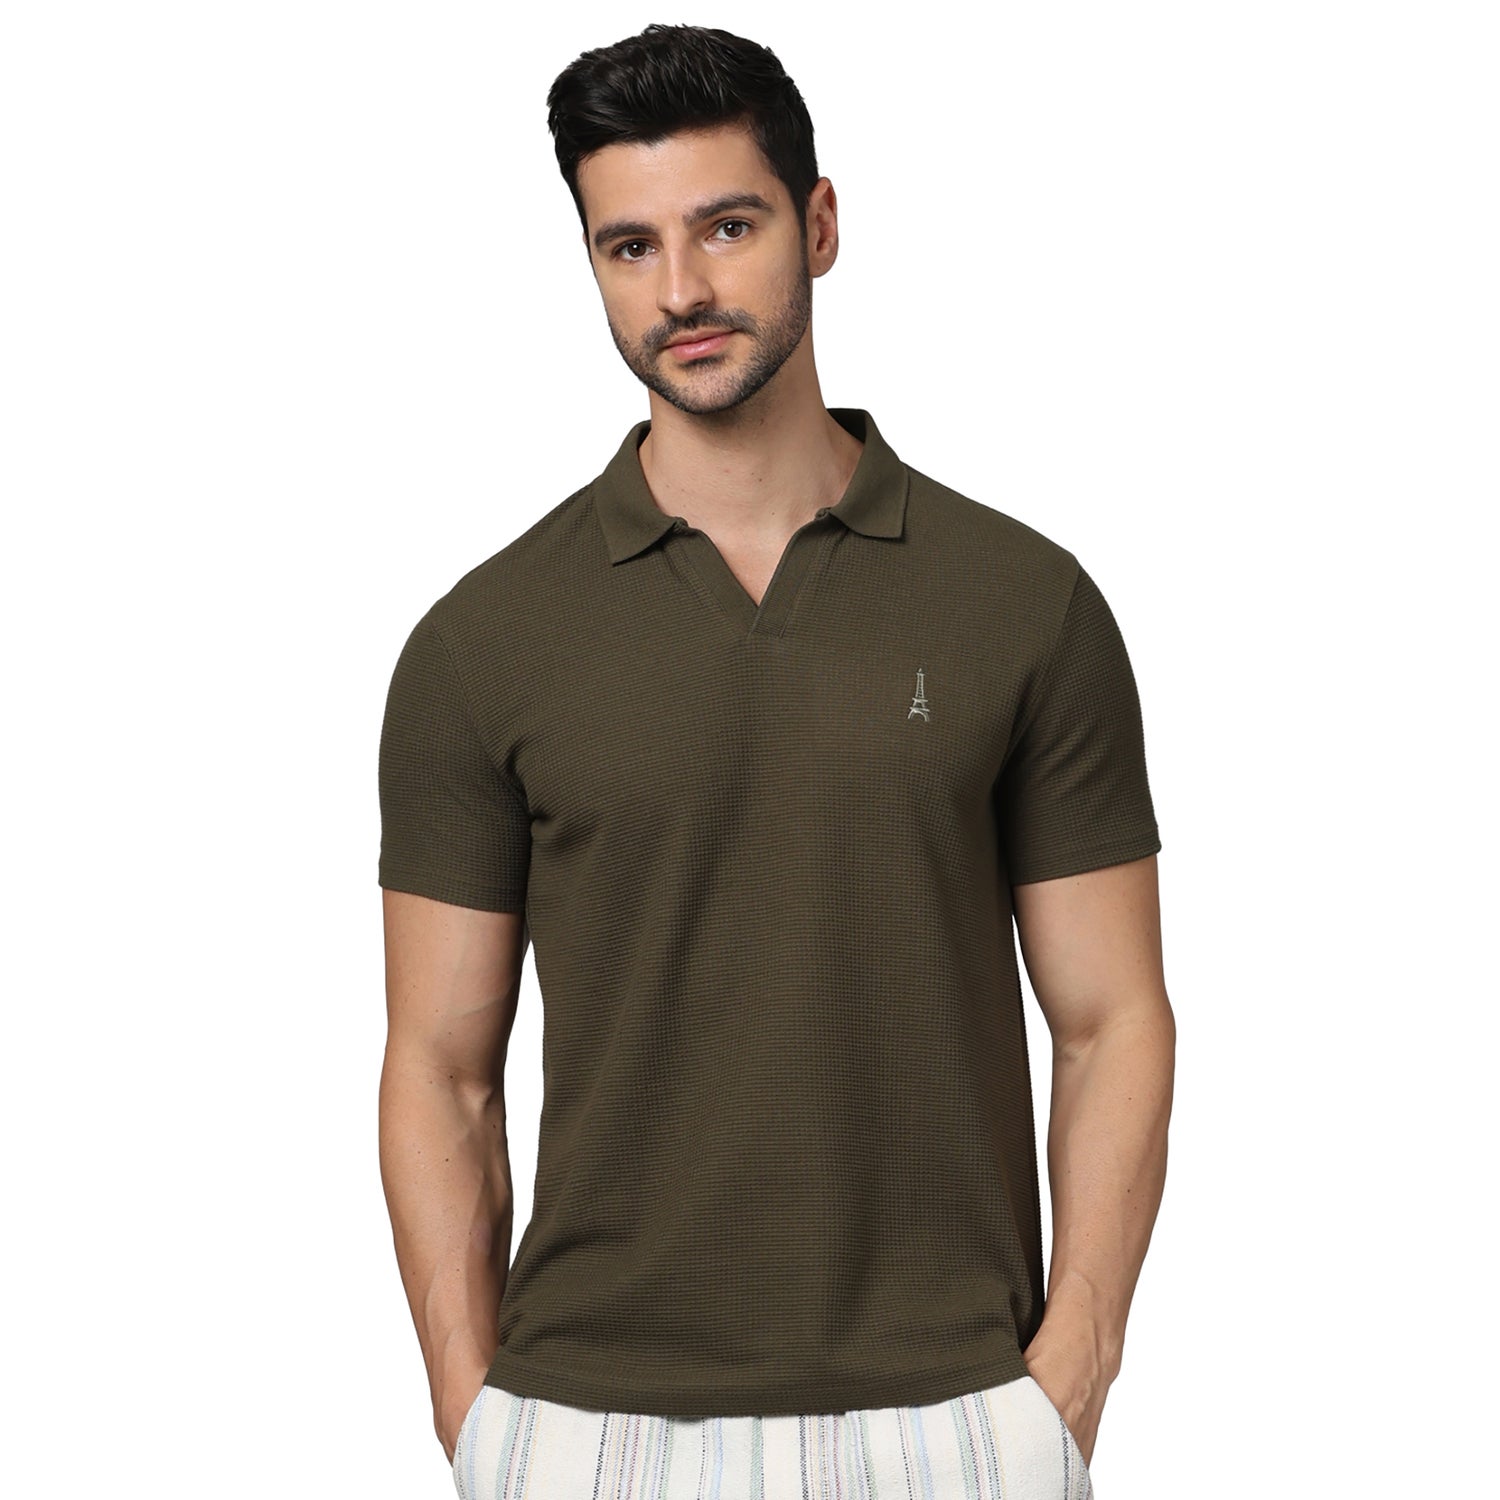 Men's Olive Polo Collar Solid Regular Fit Cotton Basic Polo Tshirts (GEWAFFLE2)